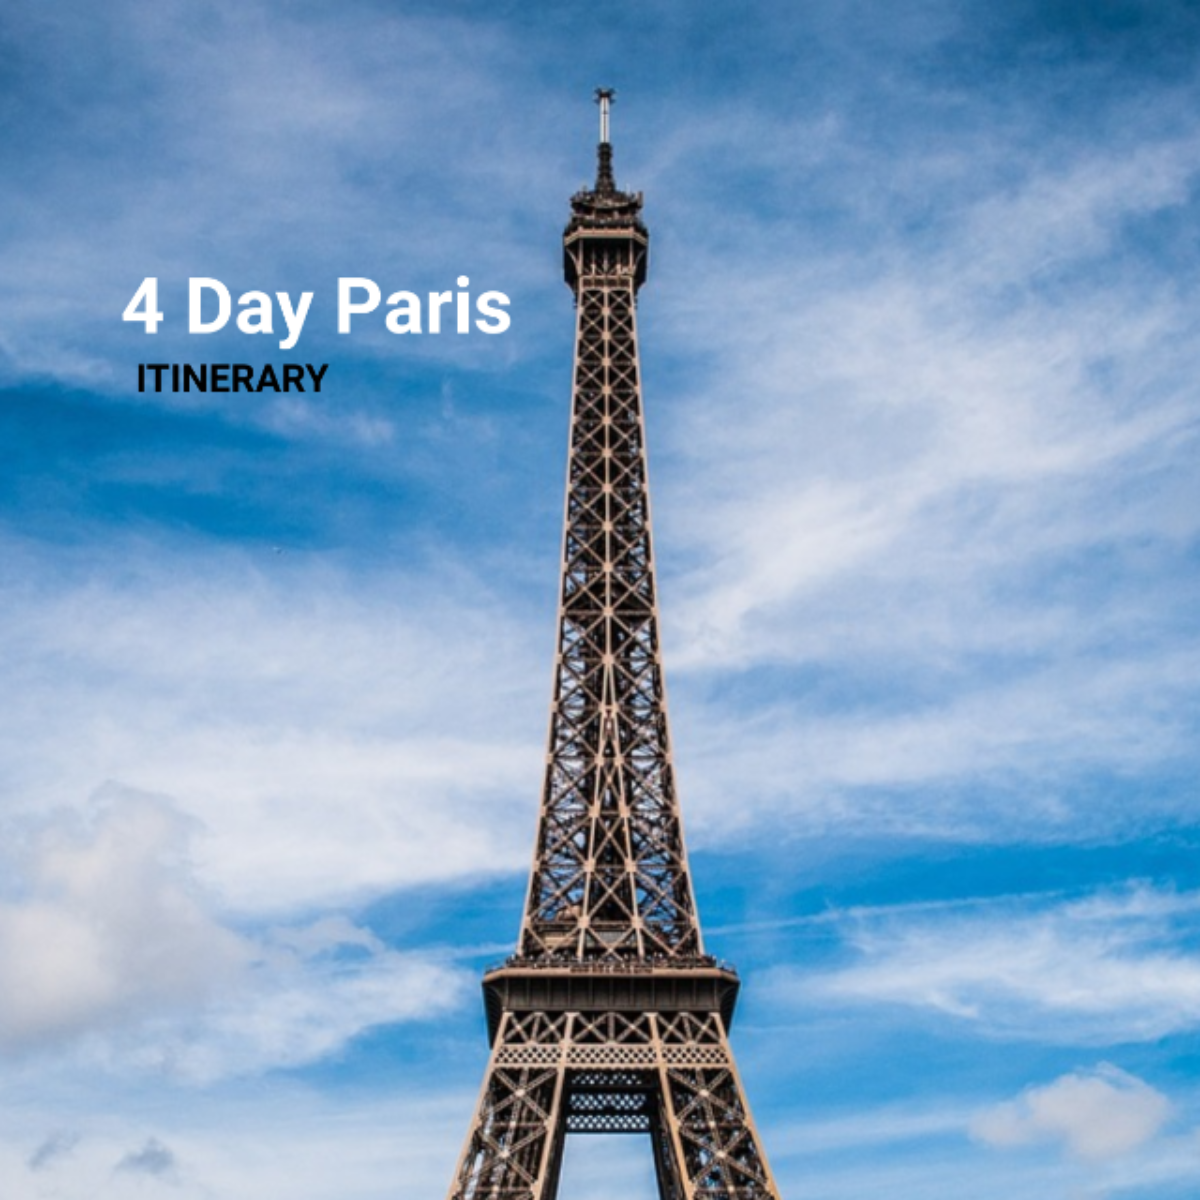 4 Day Paris Itinerary Template